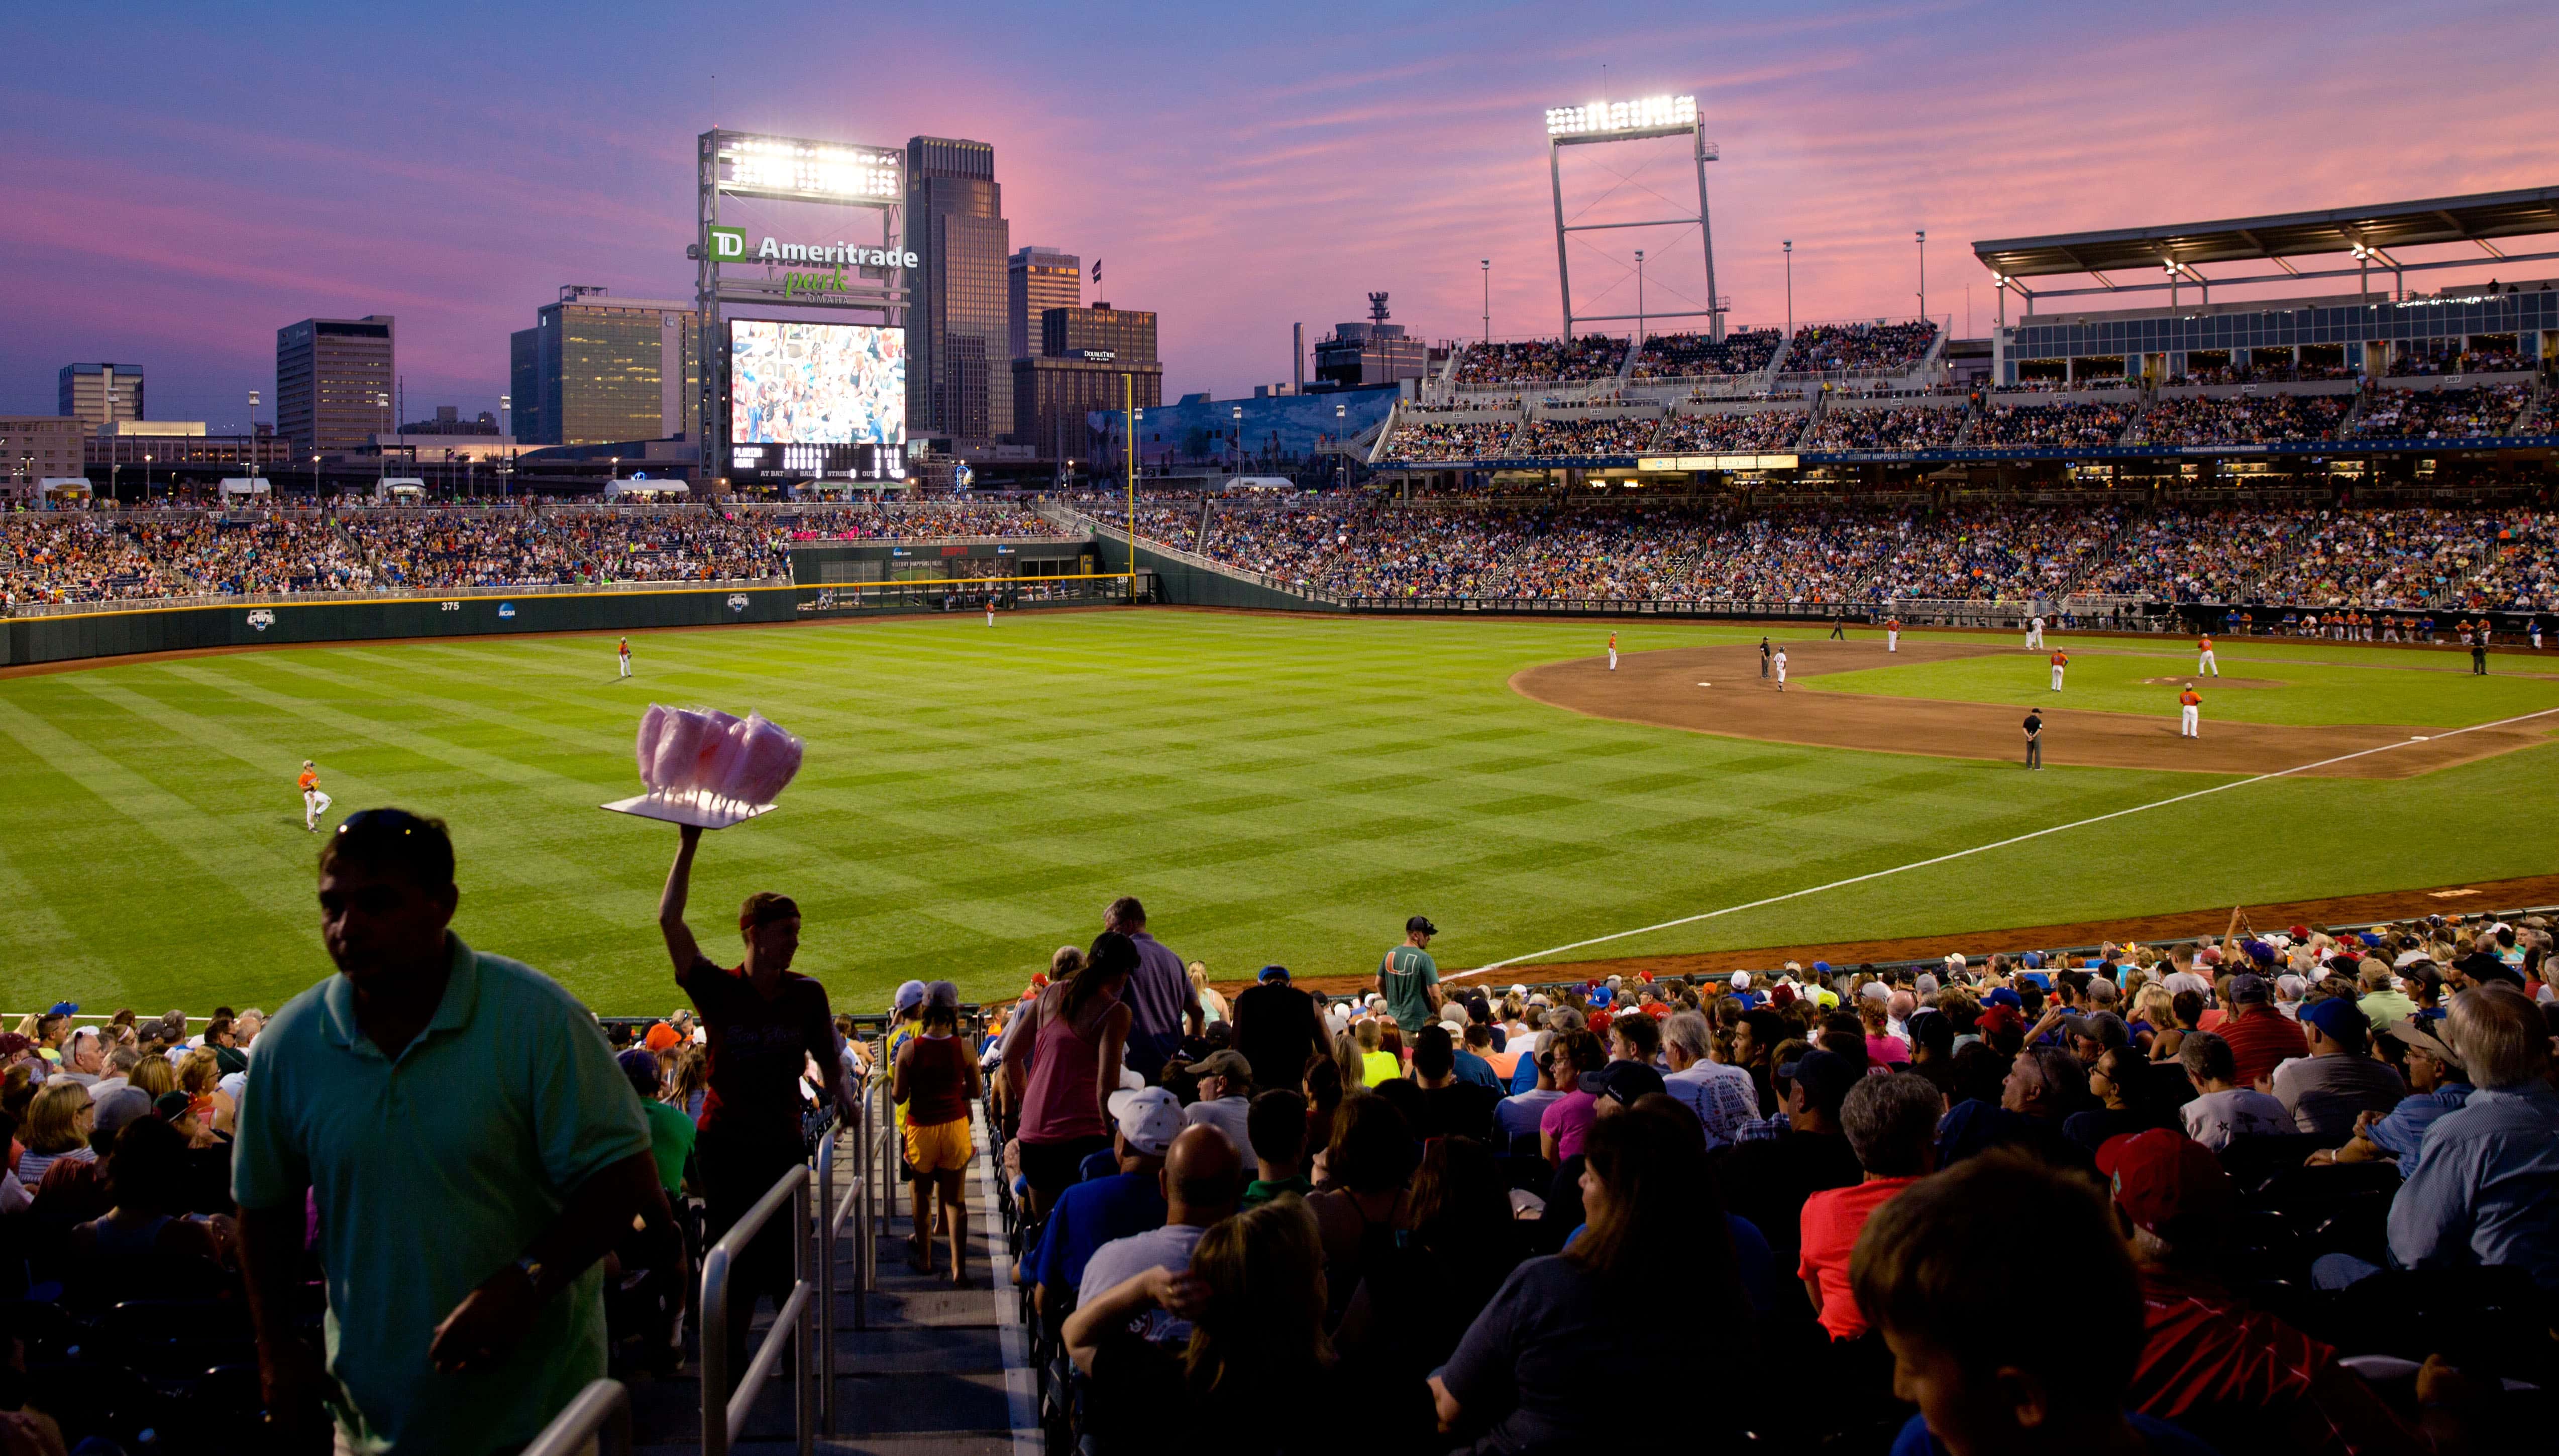 The sun sets over TD Ameritrade Park on June 17, 2015 during the Miami vs. Florida College World Series baseball game in Omaha, Neb.